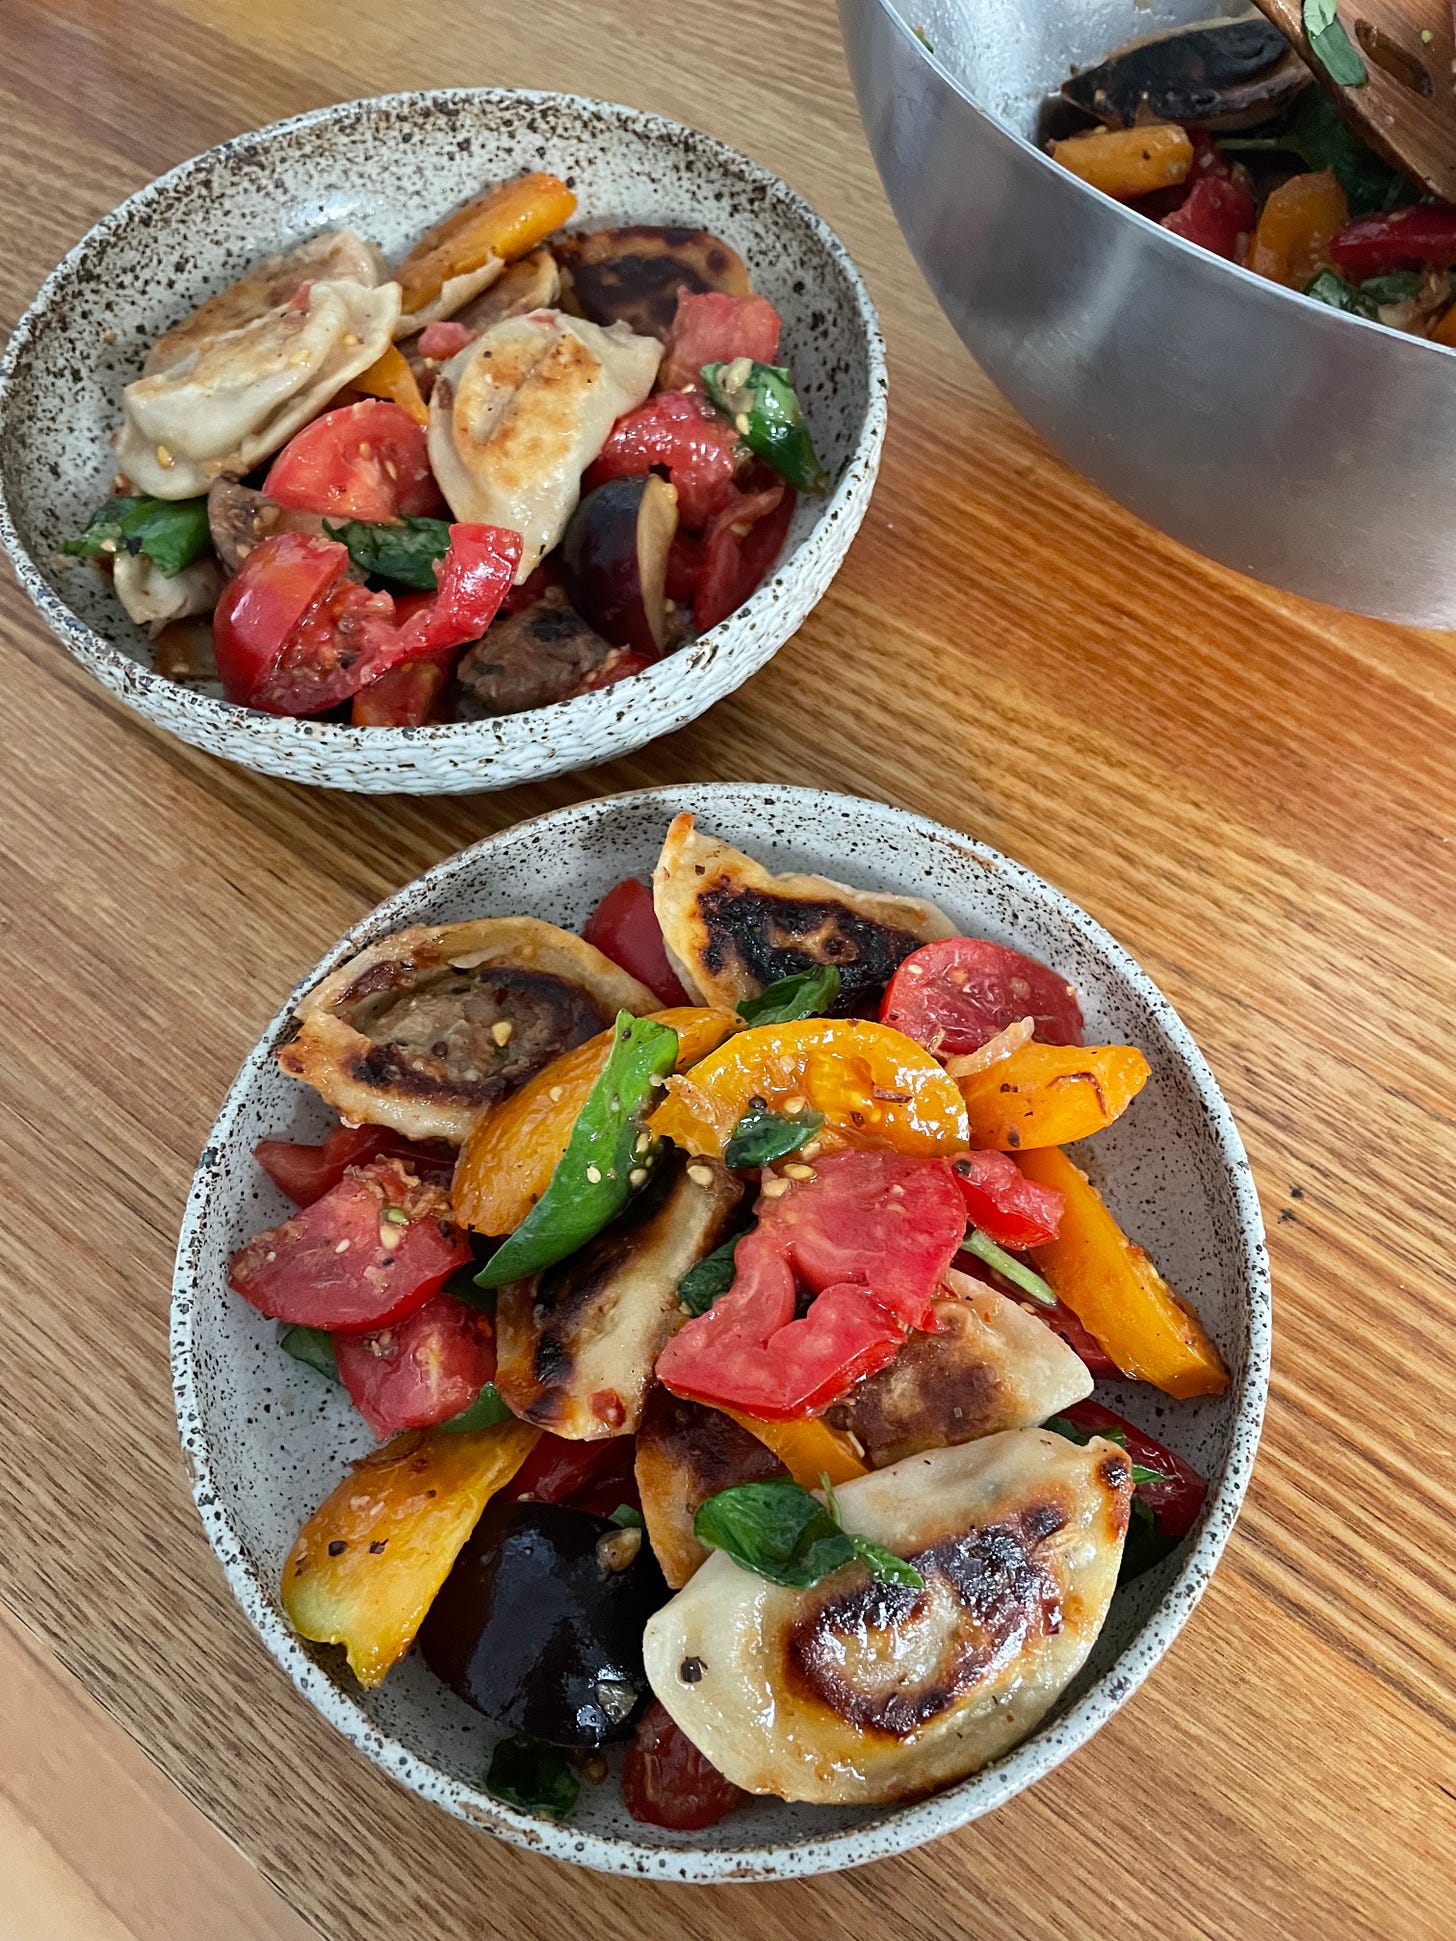 Two bowls of colourful dumpling salad, with panfried dumplings and heirloom tomatoes and basil